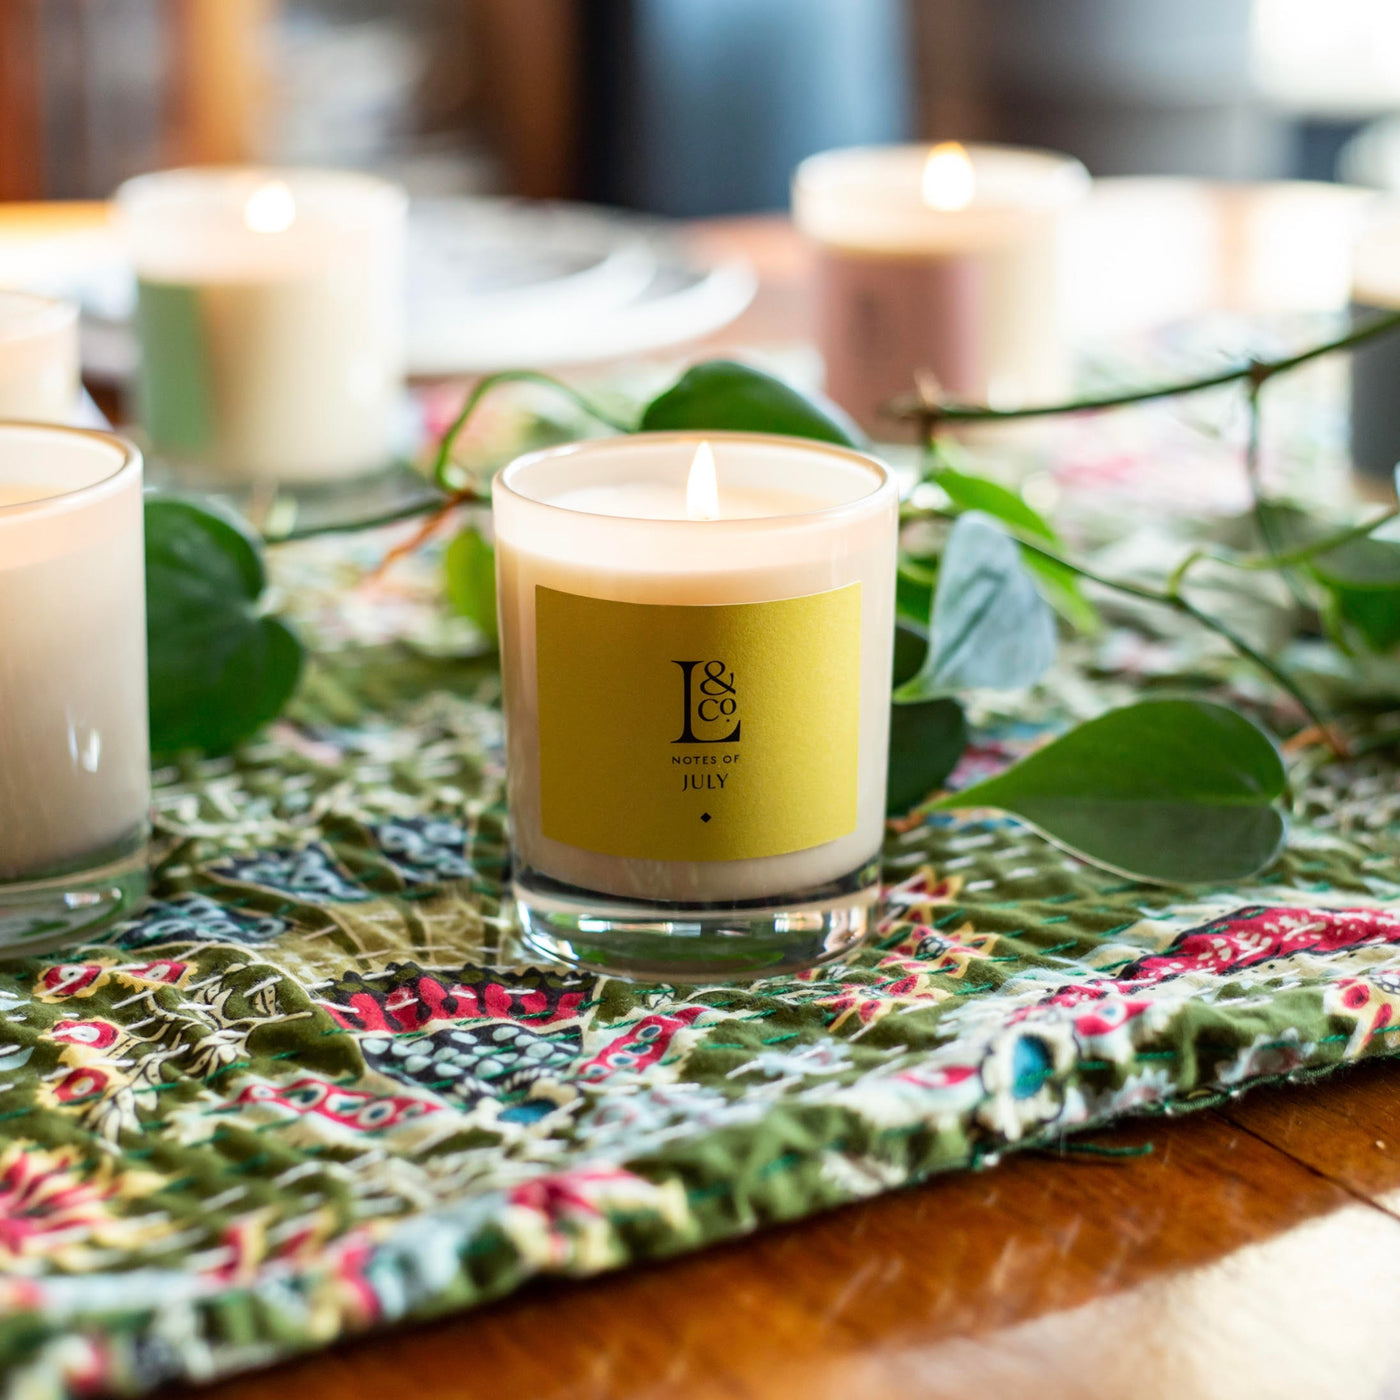 Loriest candles are inspired by each month of the year. Notes of July artfully adorns your home with the scent of tomato vine, sweet pea and mint. A delightfully fresh scent. Made in the UK. Sustainable plant-based wax.